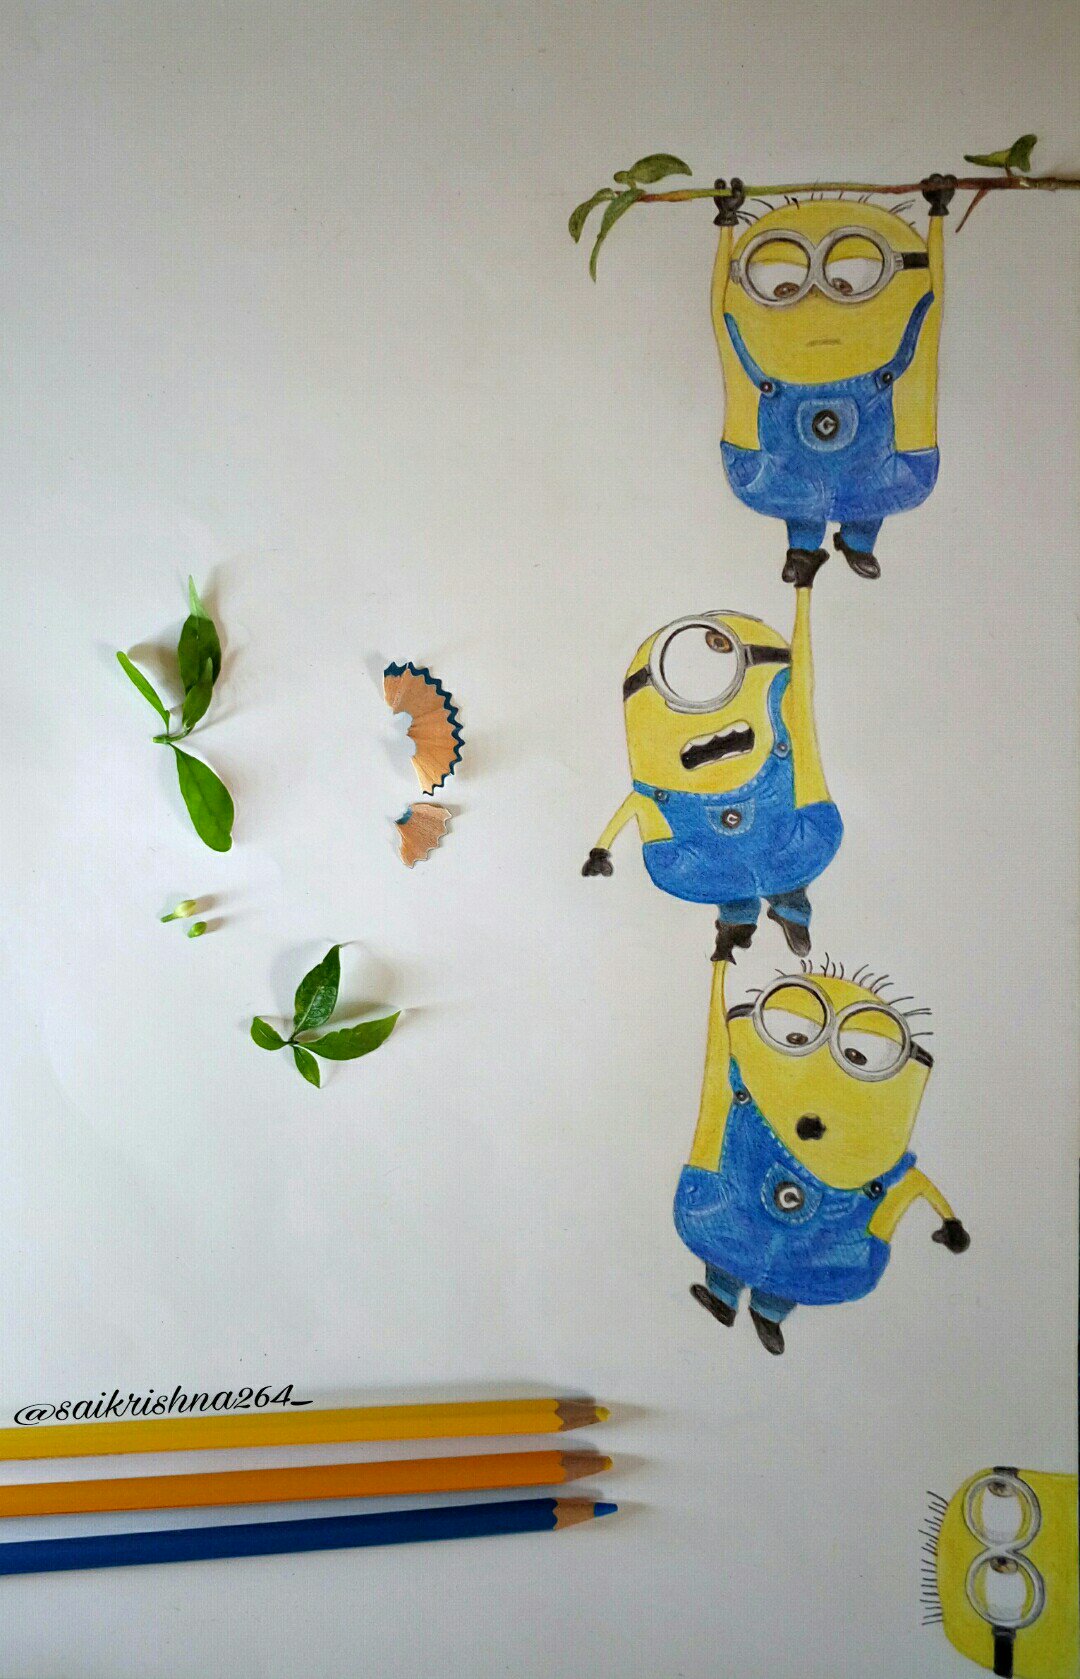 Buy Minions Cartoon Bundle Sketch Set of 3 Highquality of Classic Online  in India  Etsy